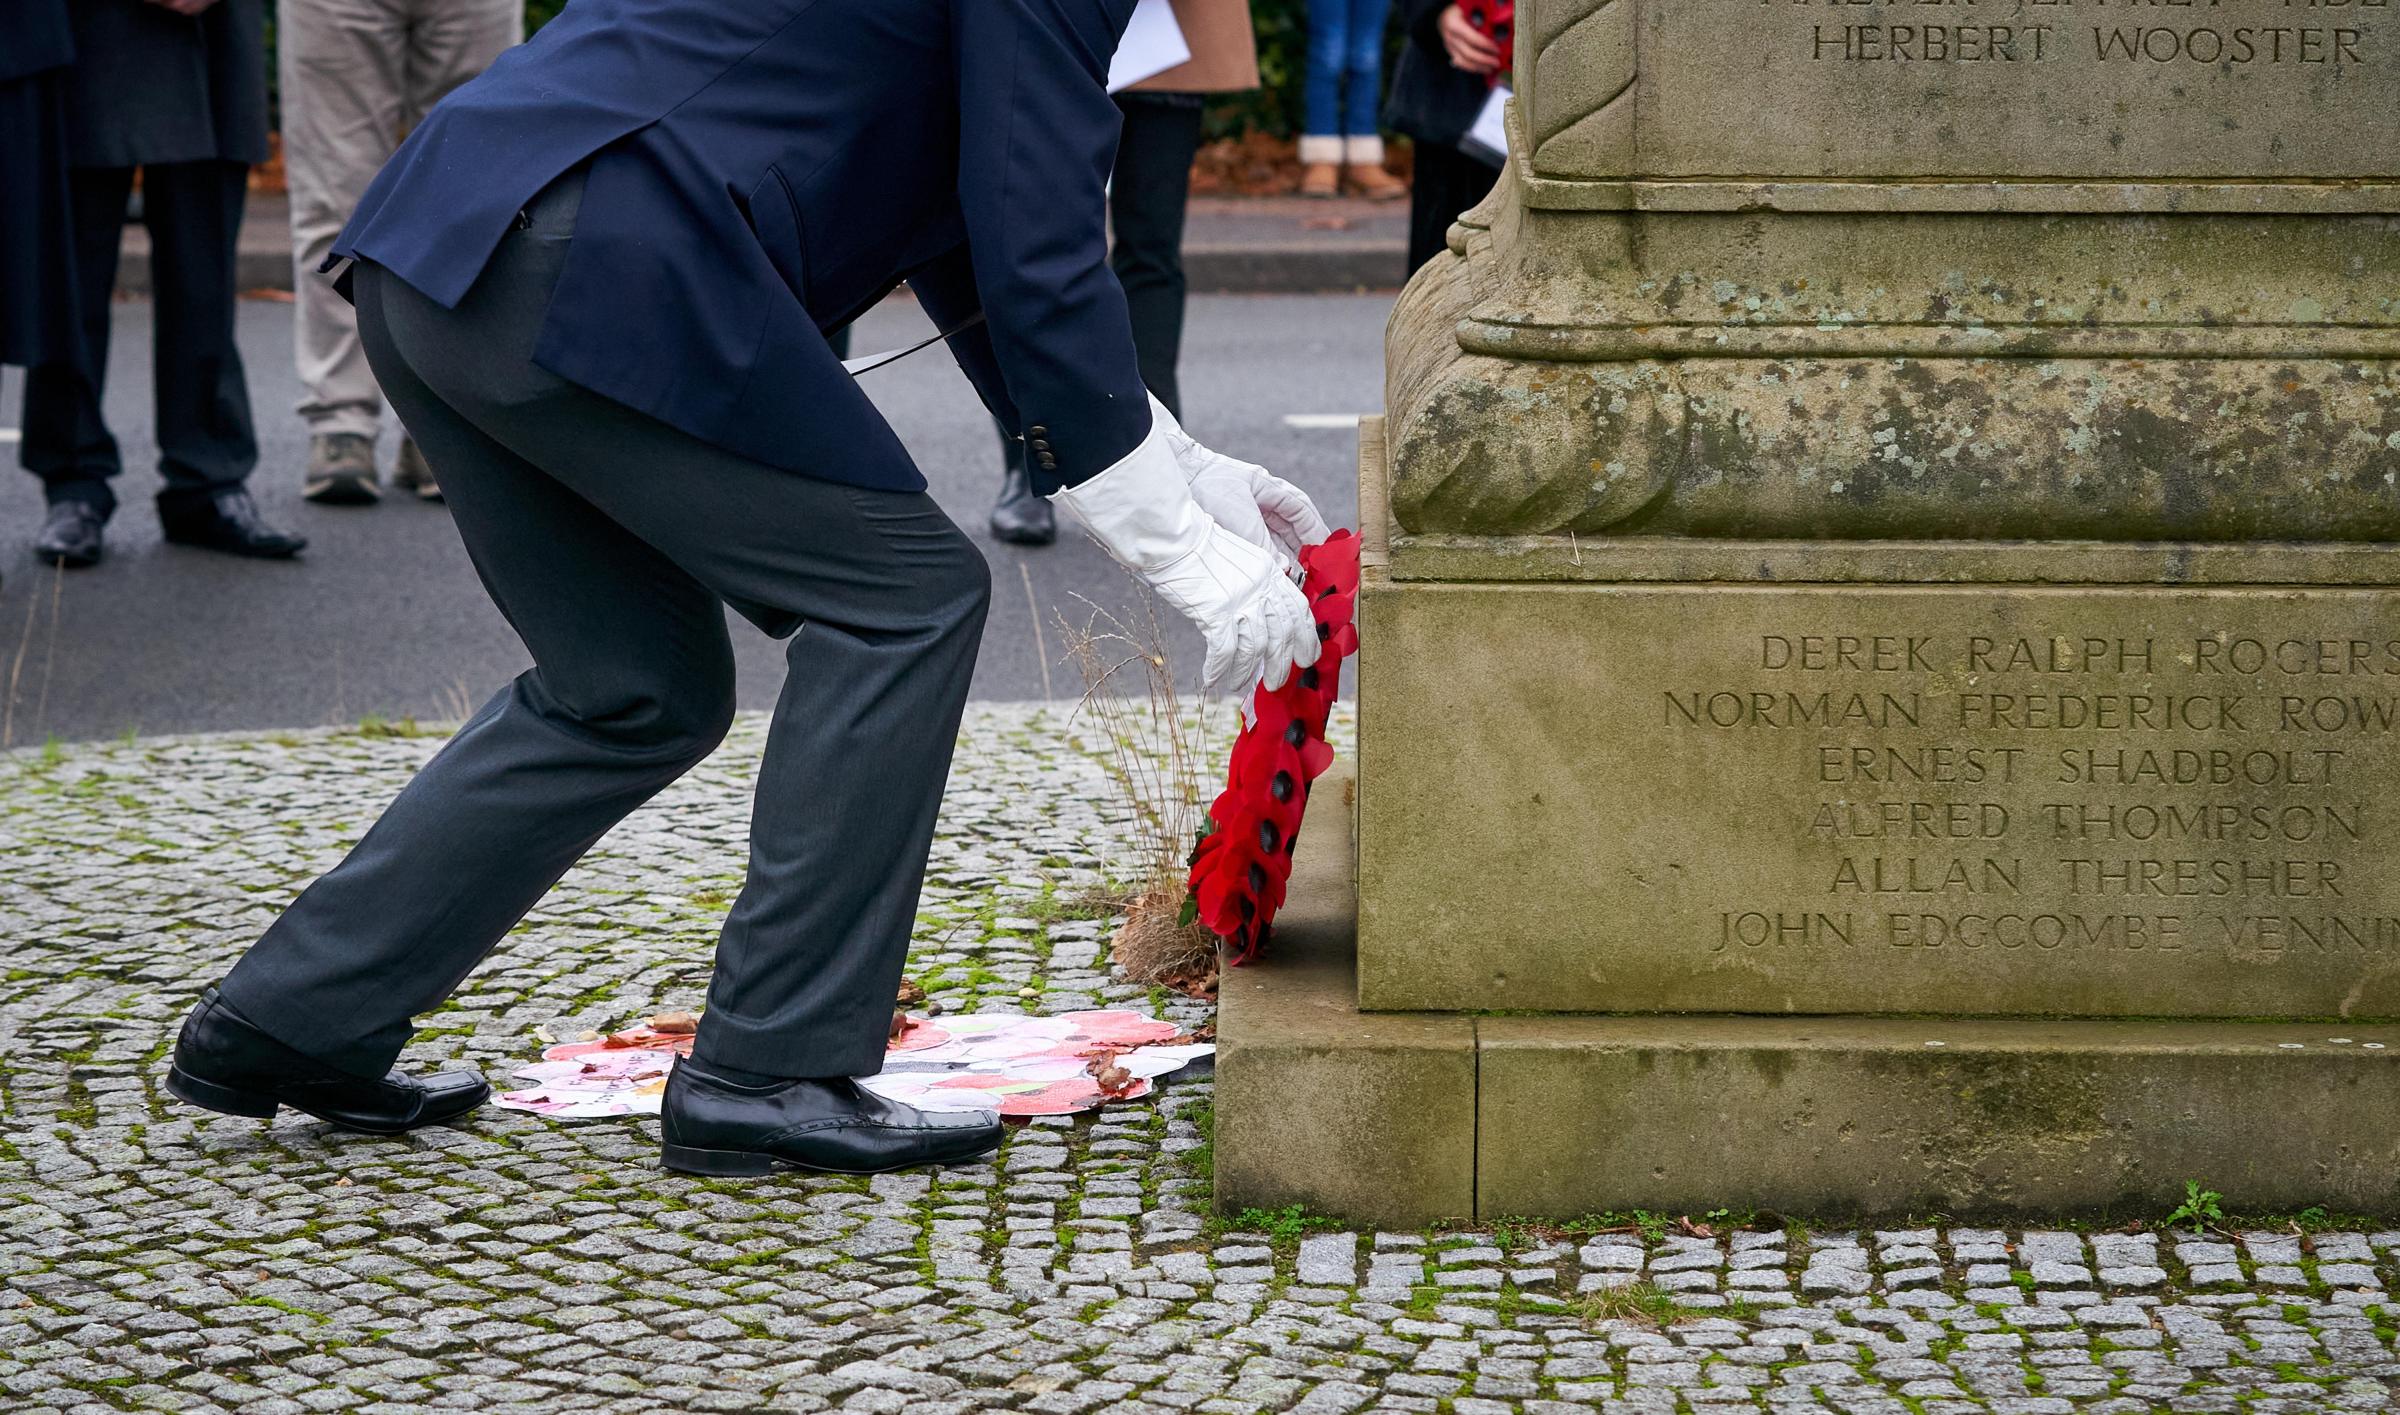 Wreaths were laid by the memorial (Photo: Simon Jacobs)